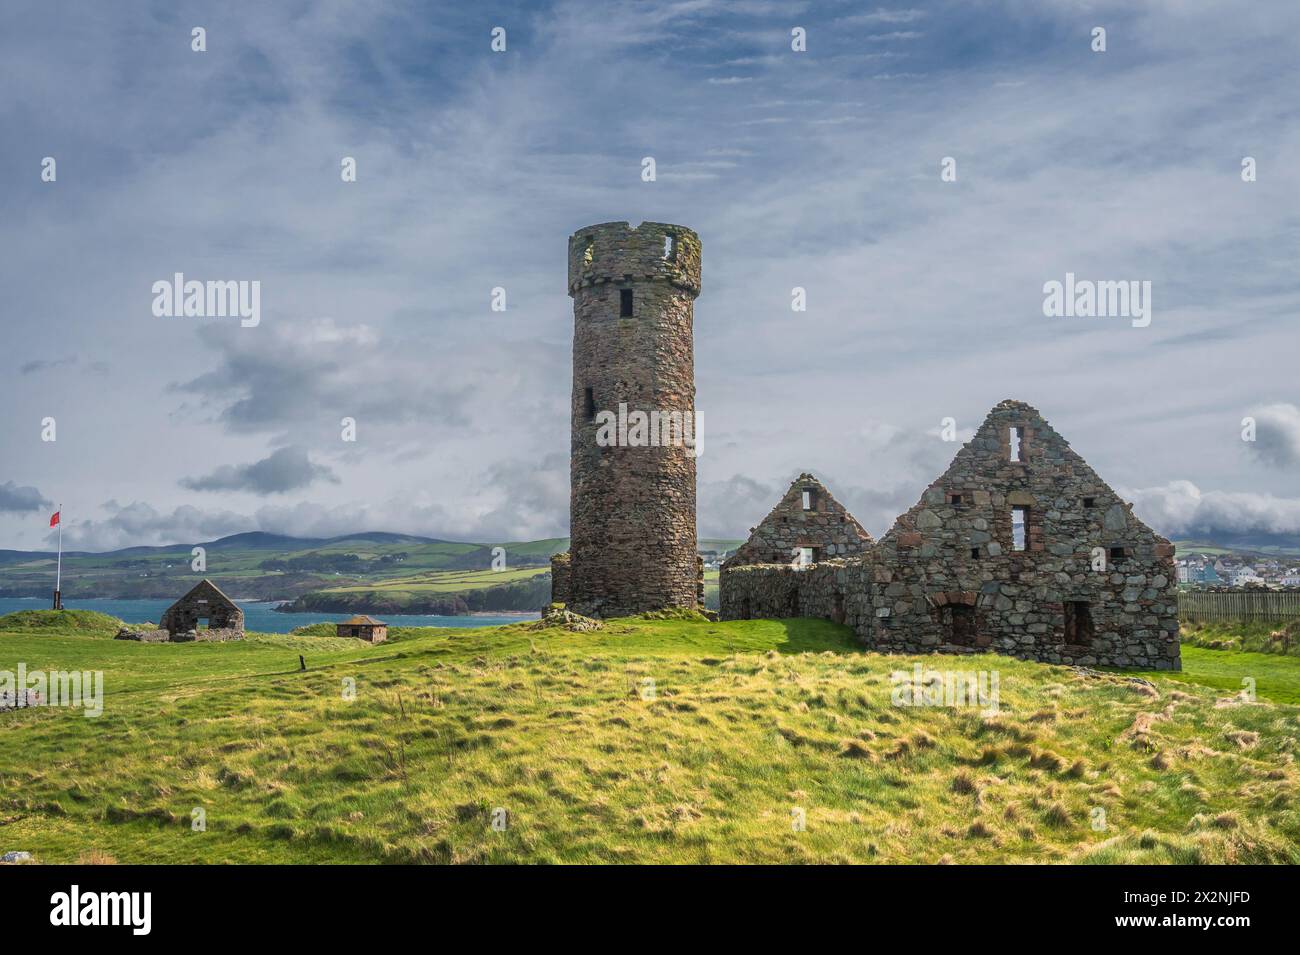 Scenic image in the grounds of the historic Peel Castle and Abbey on the west coast of the Isle of Man, seen here with the castle's defensive tower Stock Photo